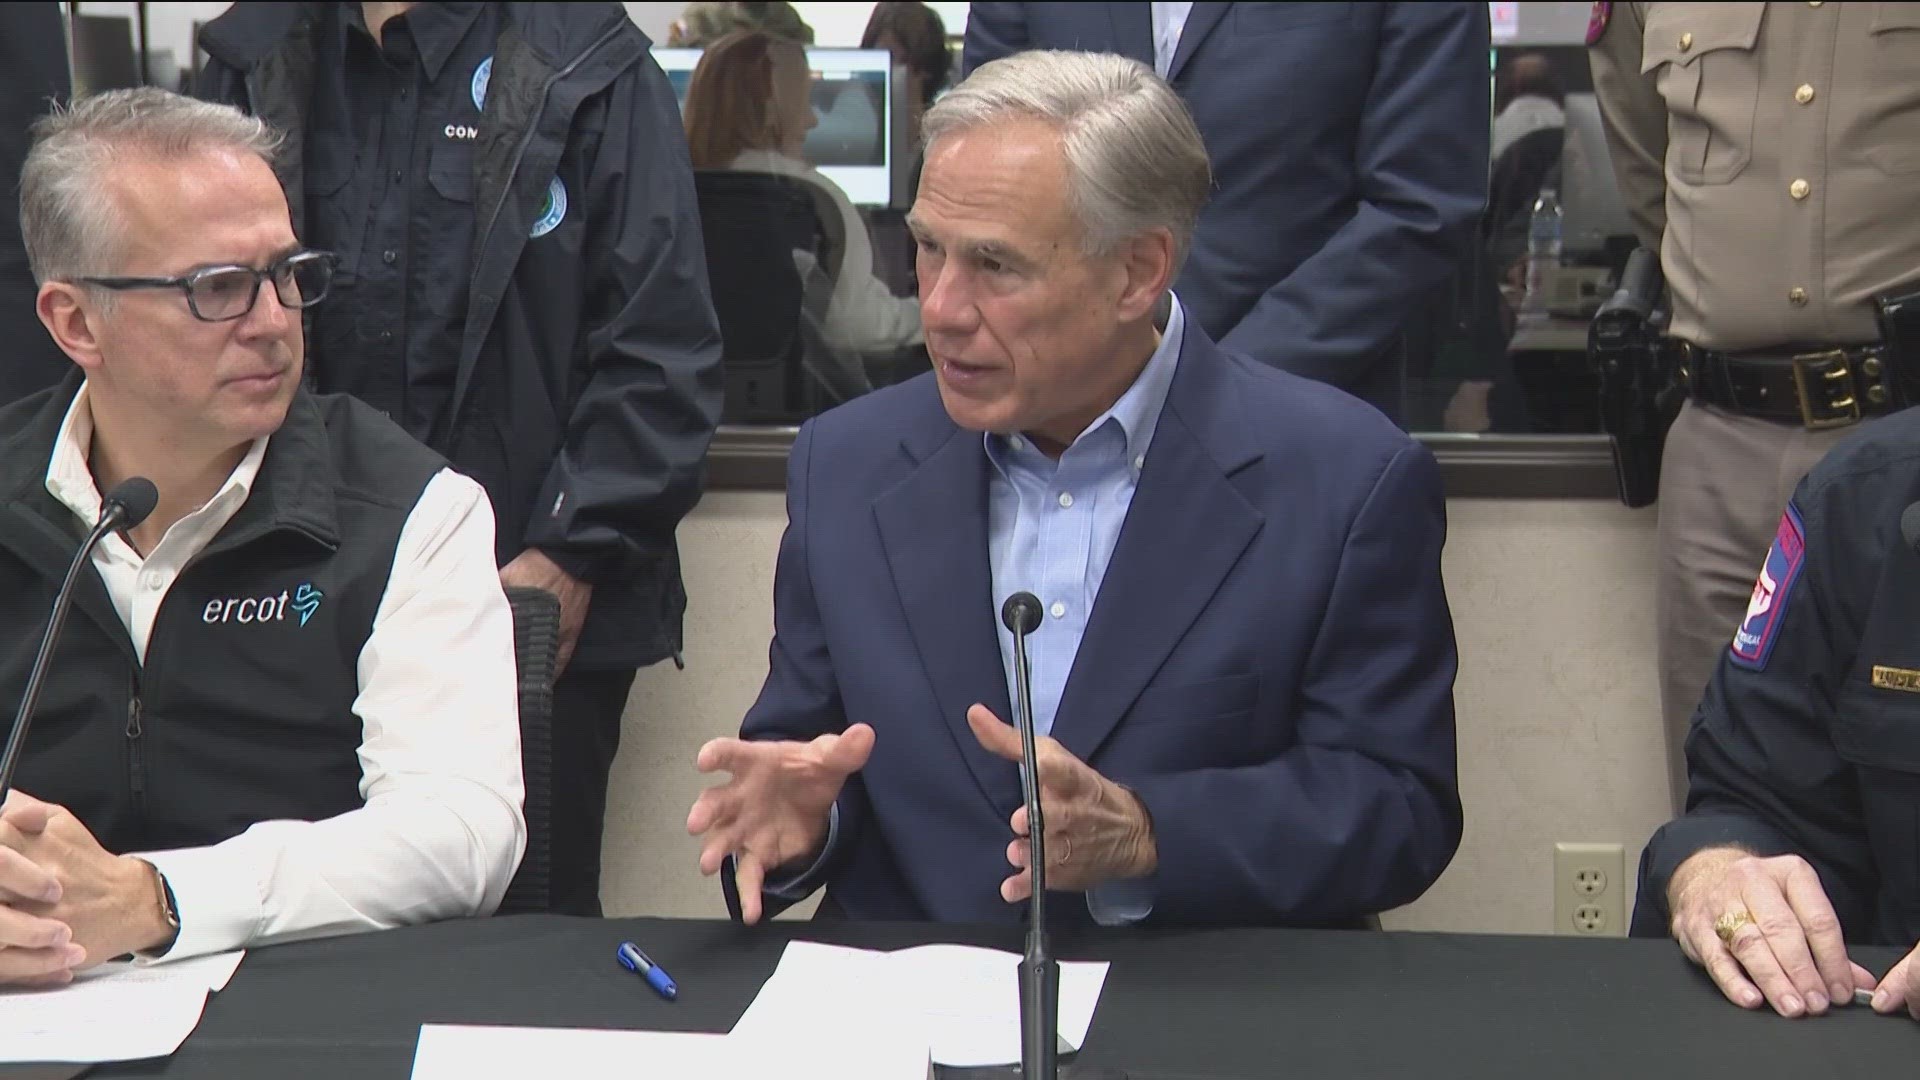 Gov. Abbott addressed concerns about the grid holding up during the multi-day freeze and said the power generators have been fully inspected and winterized.